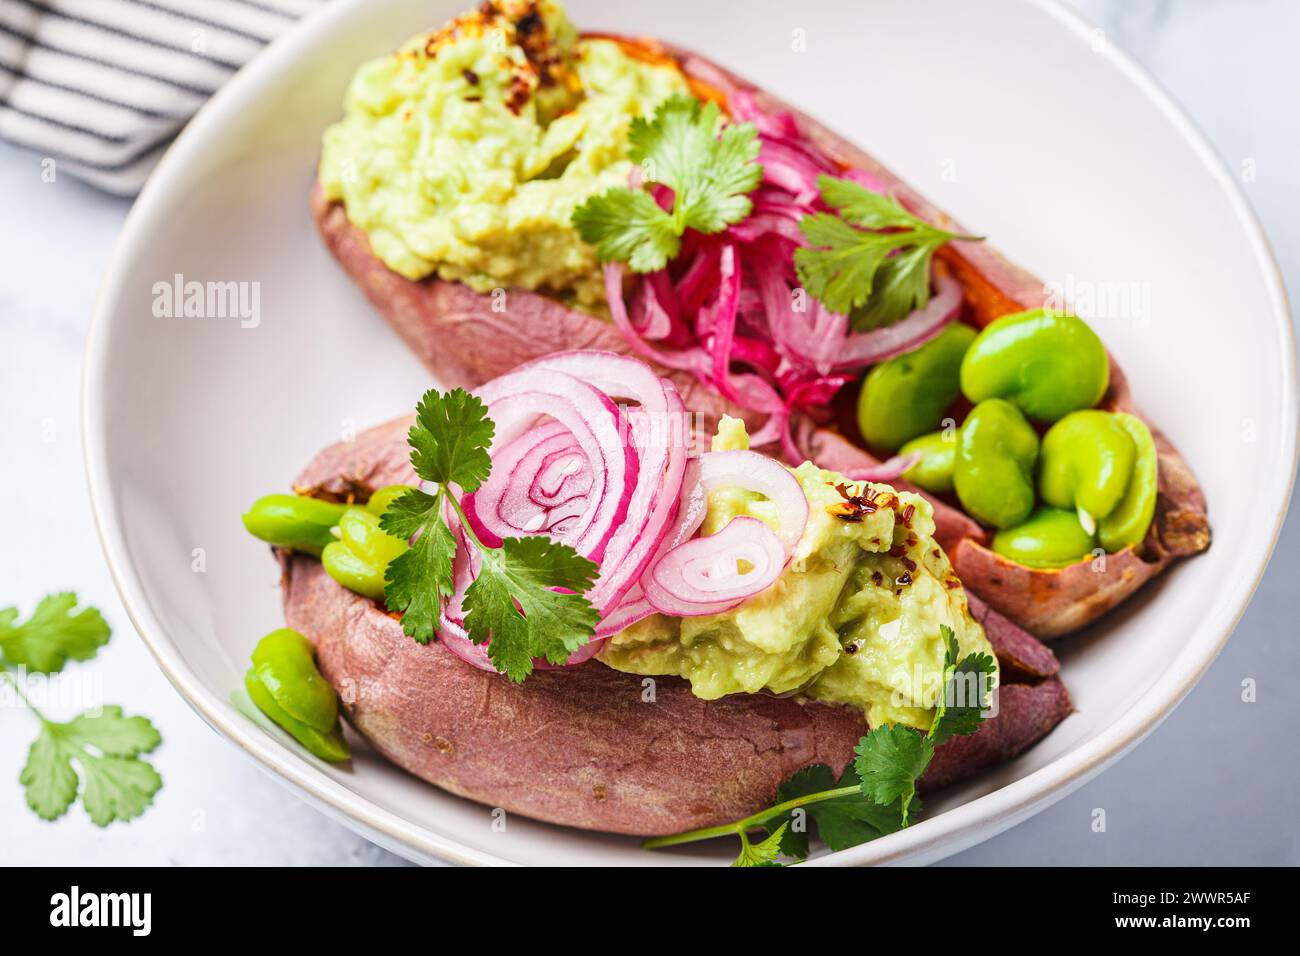 Baked sweet potato halves with guacamole, edamame beans, pickled red onion and cilantro, close-up. Vegan recipe, vegetarian diet food. Stock Photo